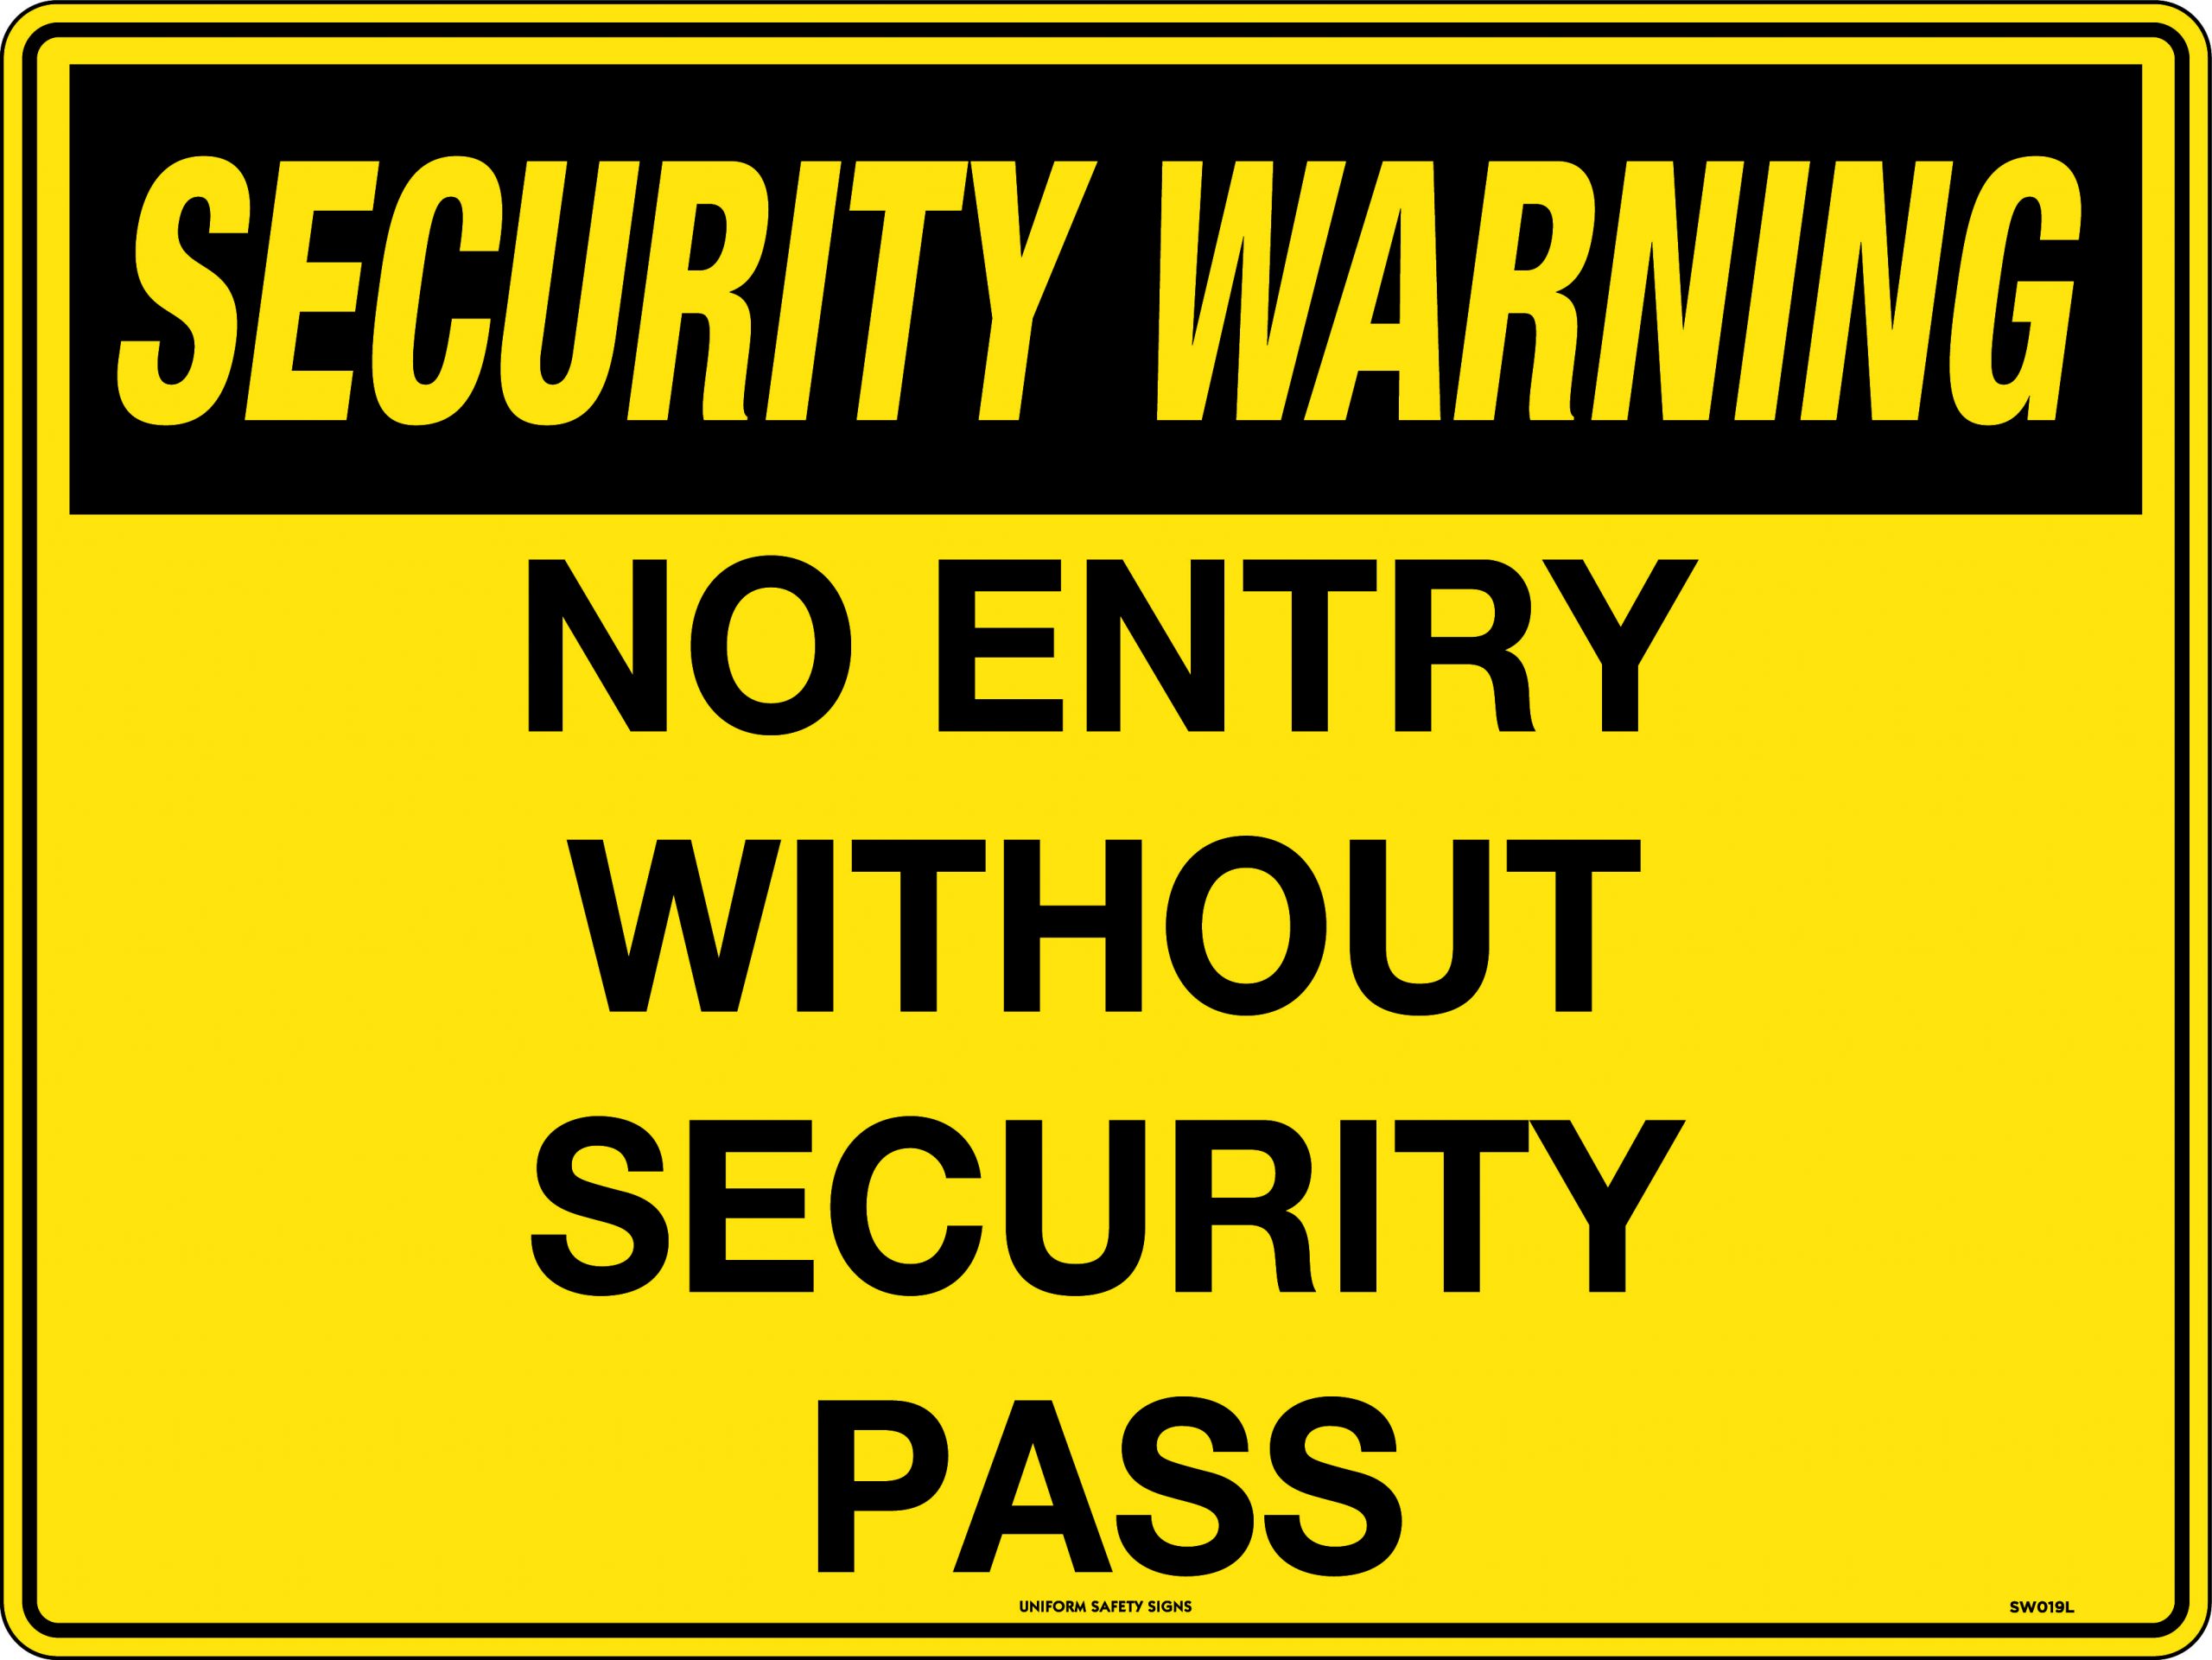 UNIFORM SAFETY 600X450MM POLY SEC WARNING NO ENTRY WITHOUT SEC PASS